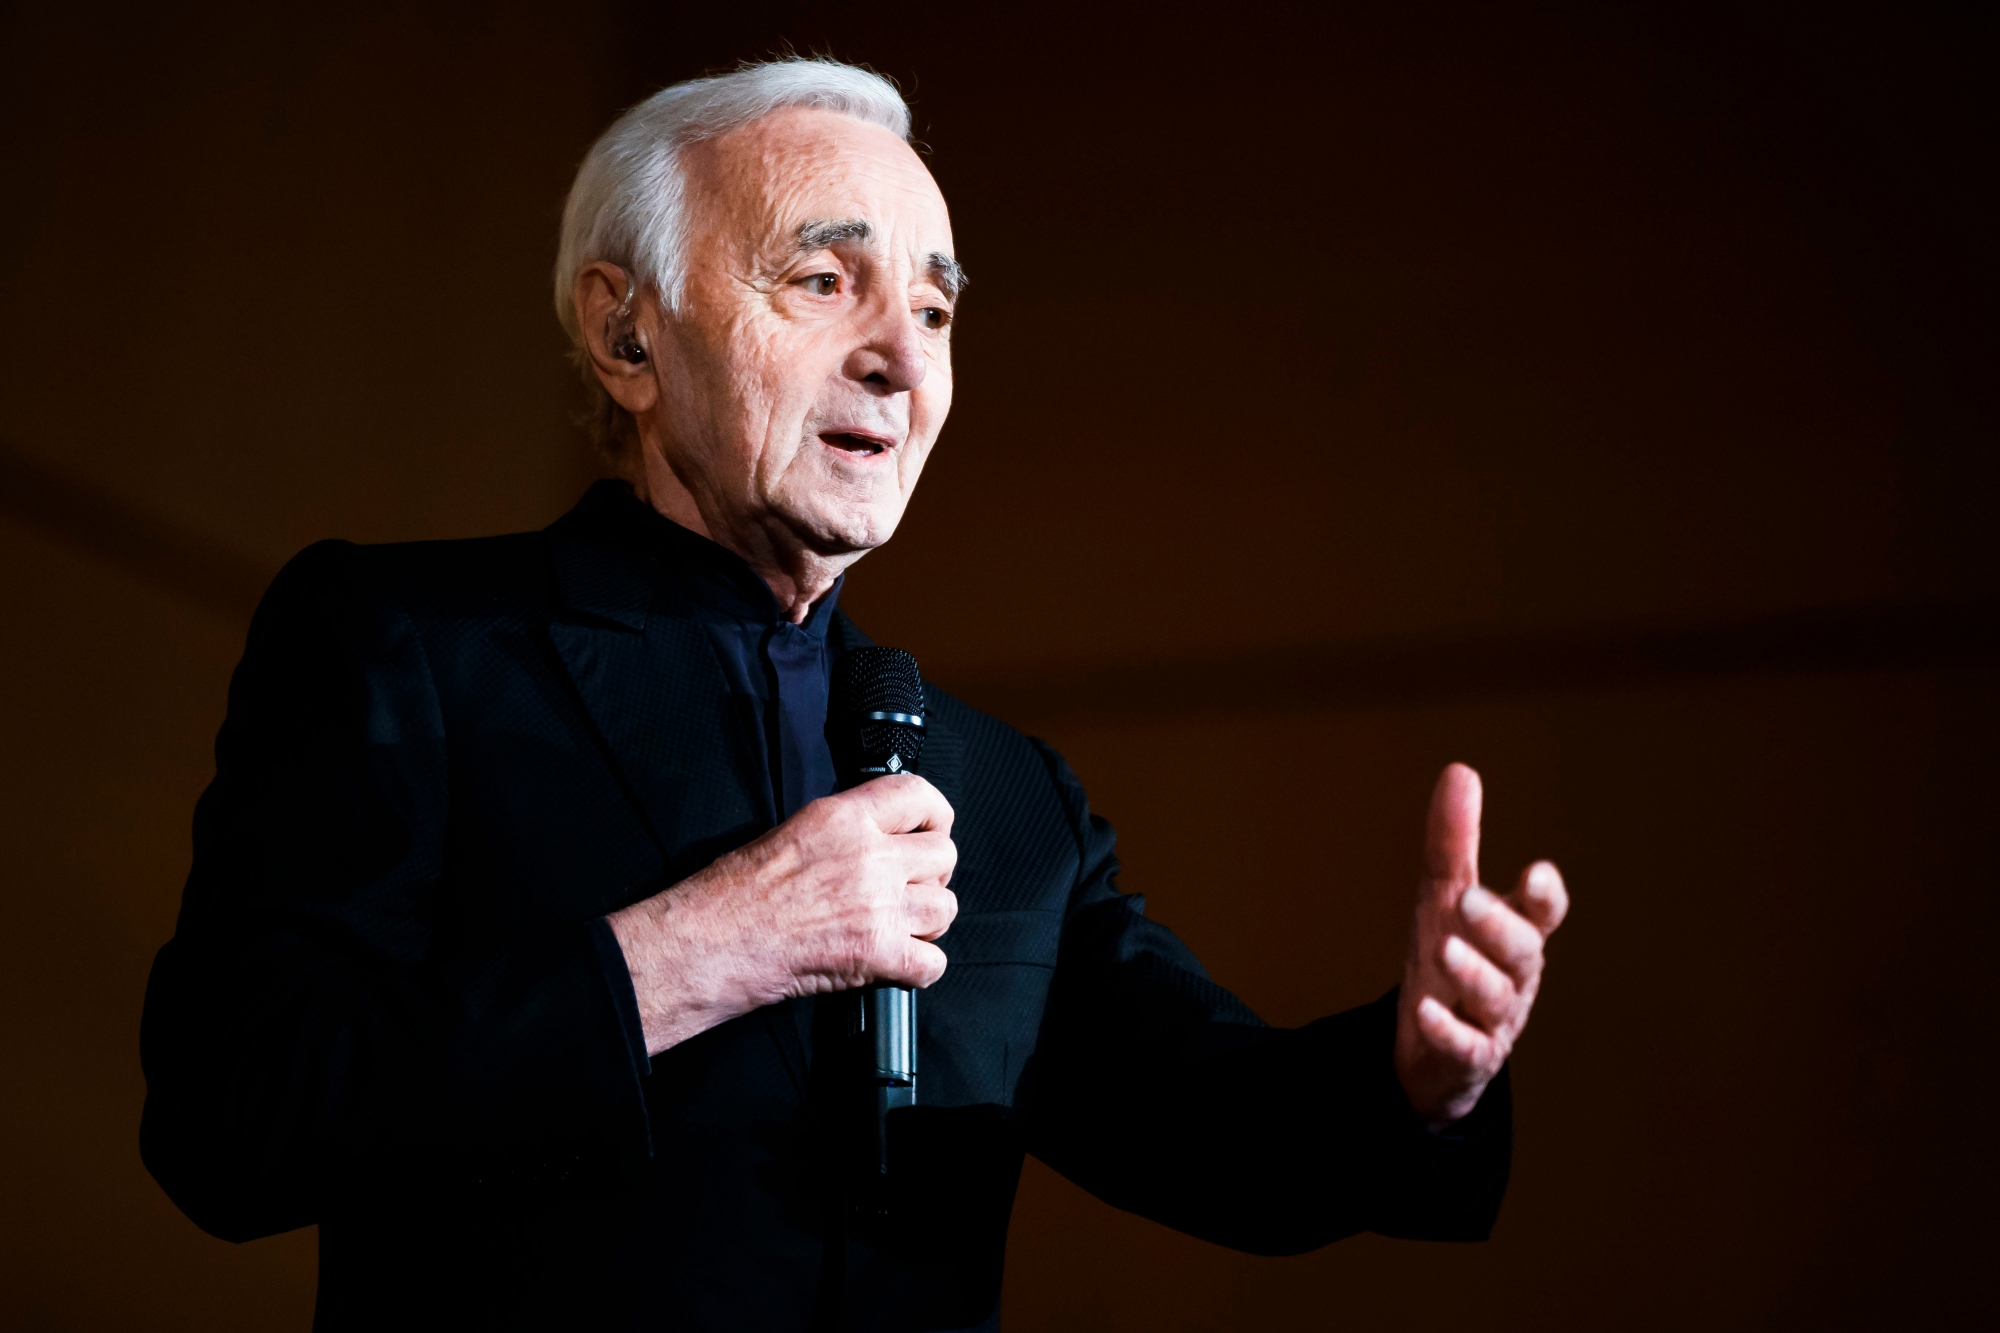 Armenian born French singer Charles Aznavour performs during the "Grand Concert de la Francophonie" held in honor of Armenia, upcoming host country of the 17th Francophone Summit of the International Organization of French speakers, at the European headquarters of the United Nations in  in Geneva Switzerland, Tuesday, March 13, 2018. (KEYSTONE/Valentin Flauraud) SWITZERLAND CONCERT FRANCOPHONIE